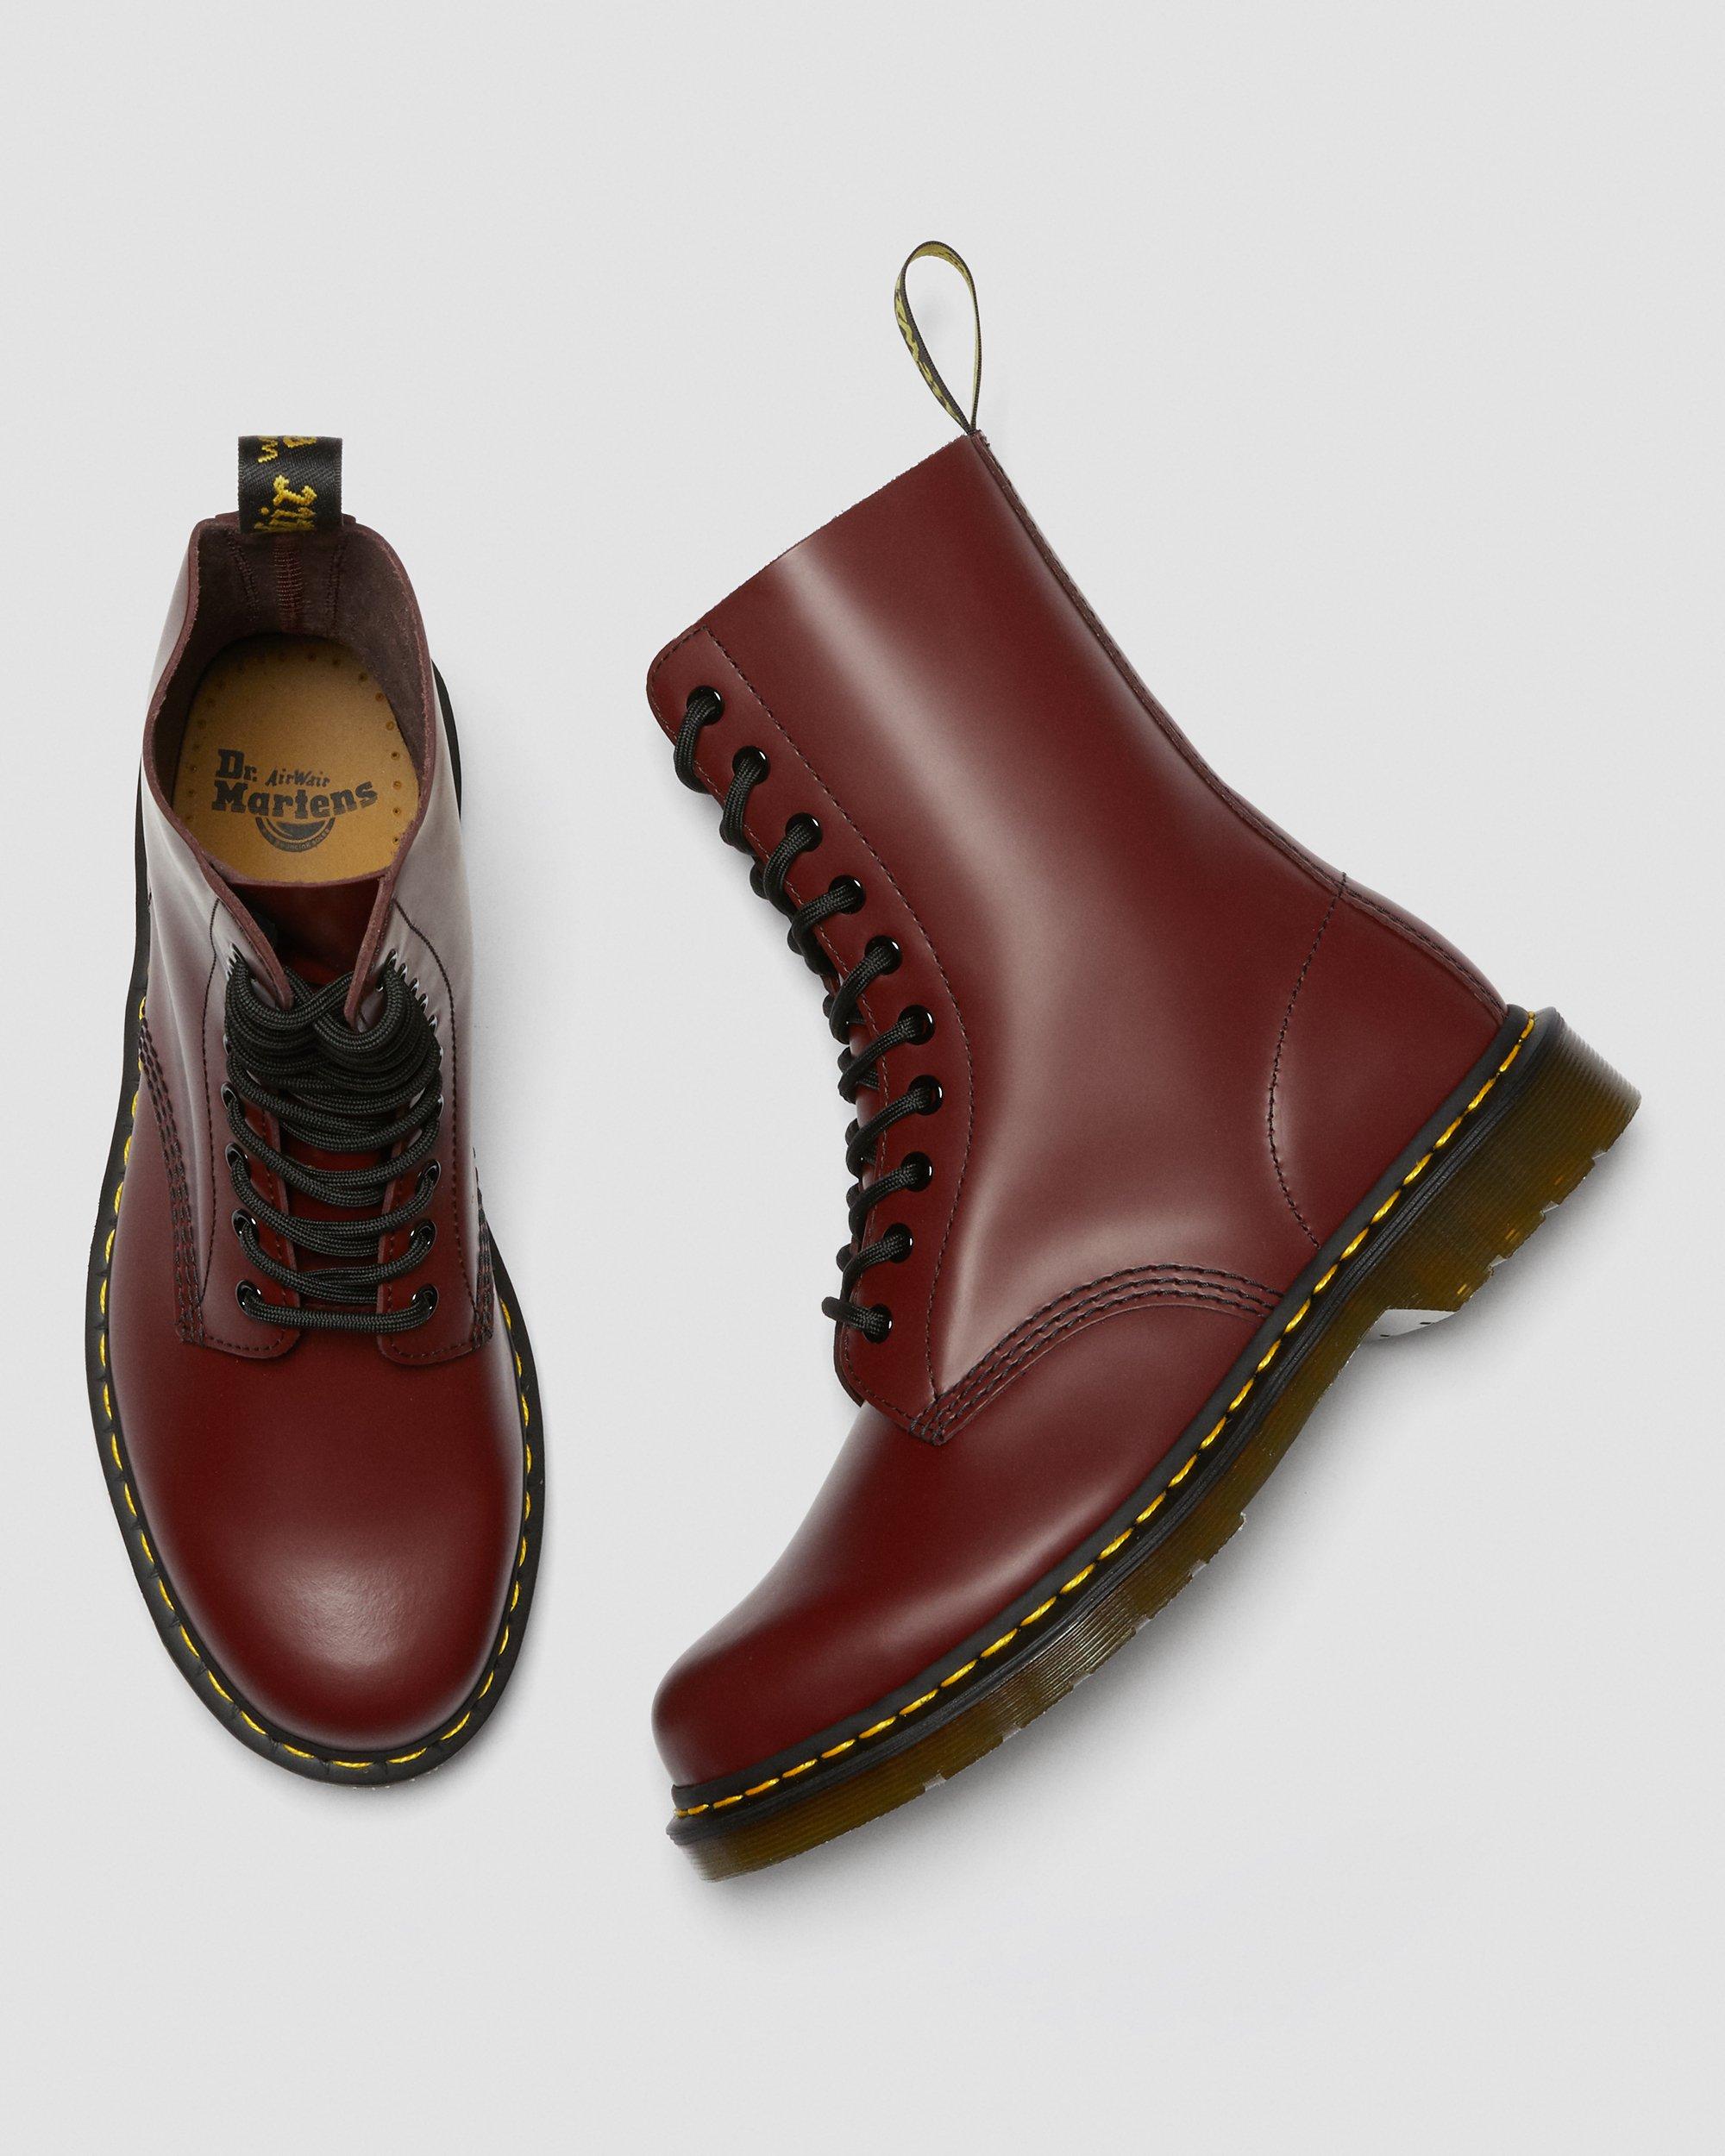 1490 DARK RED1490 Smooth Leather High Lace Up Boots Dr. Martens